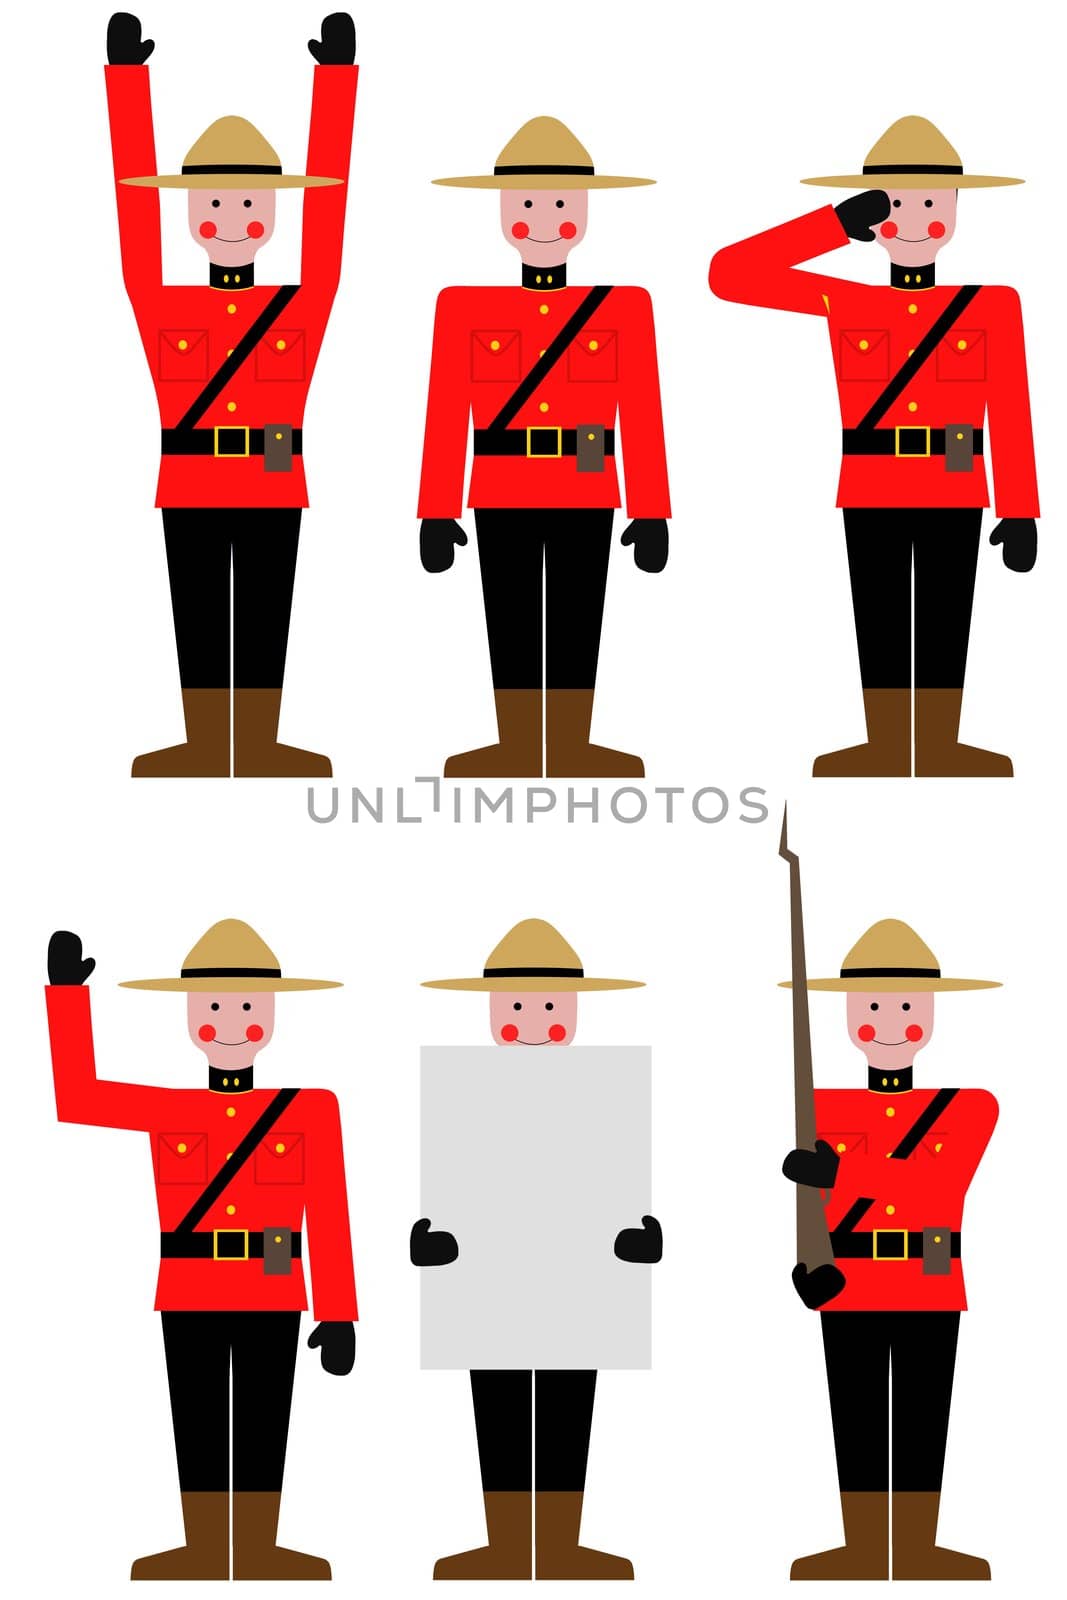 Illustration of a Mountie in different poses